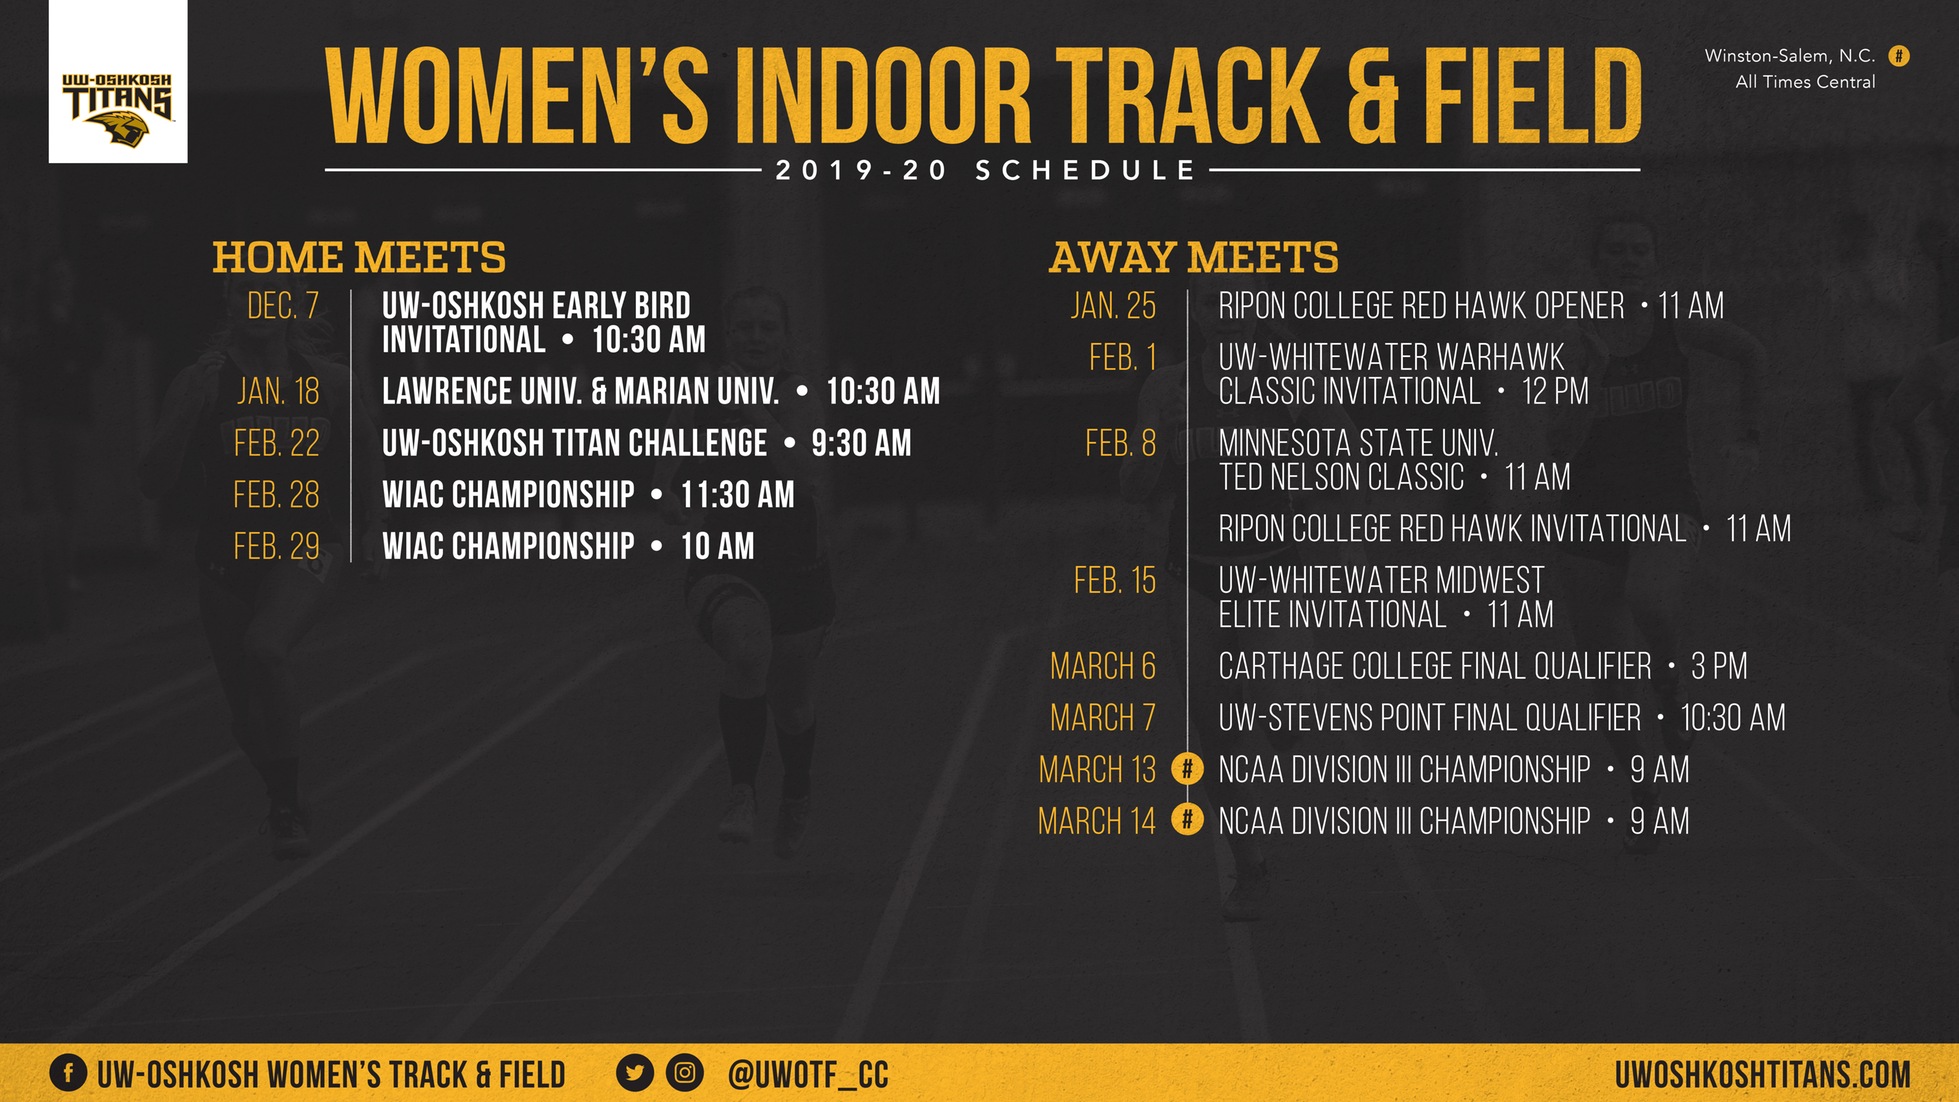 WIAC Championship Among Four Meets To Be Hosted By Women's Indoor Track & Field Team